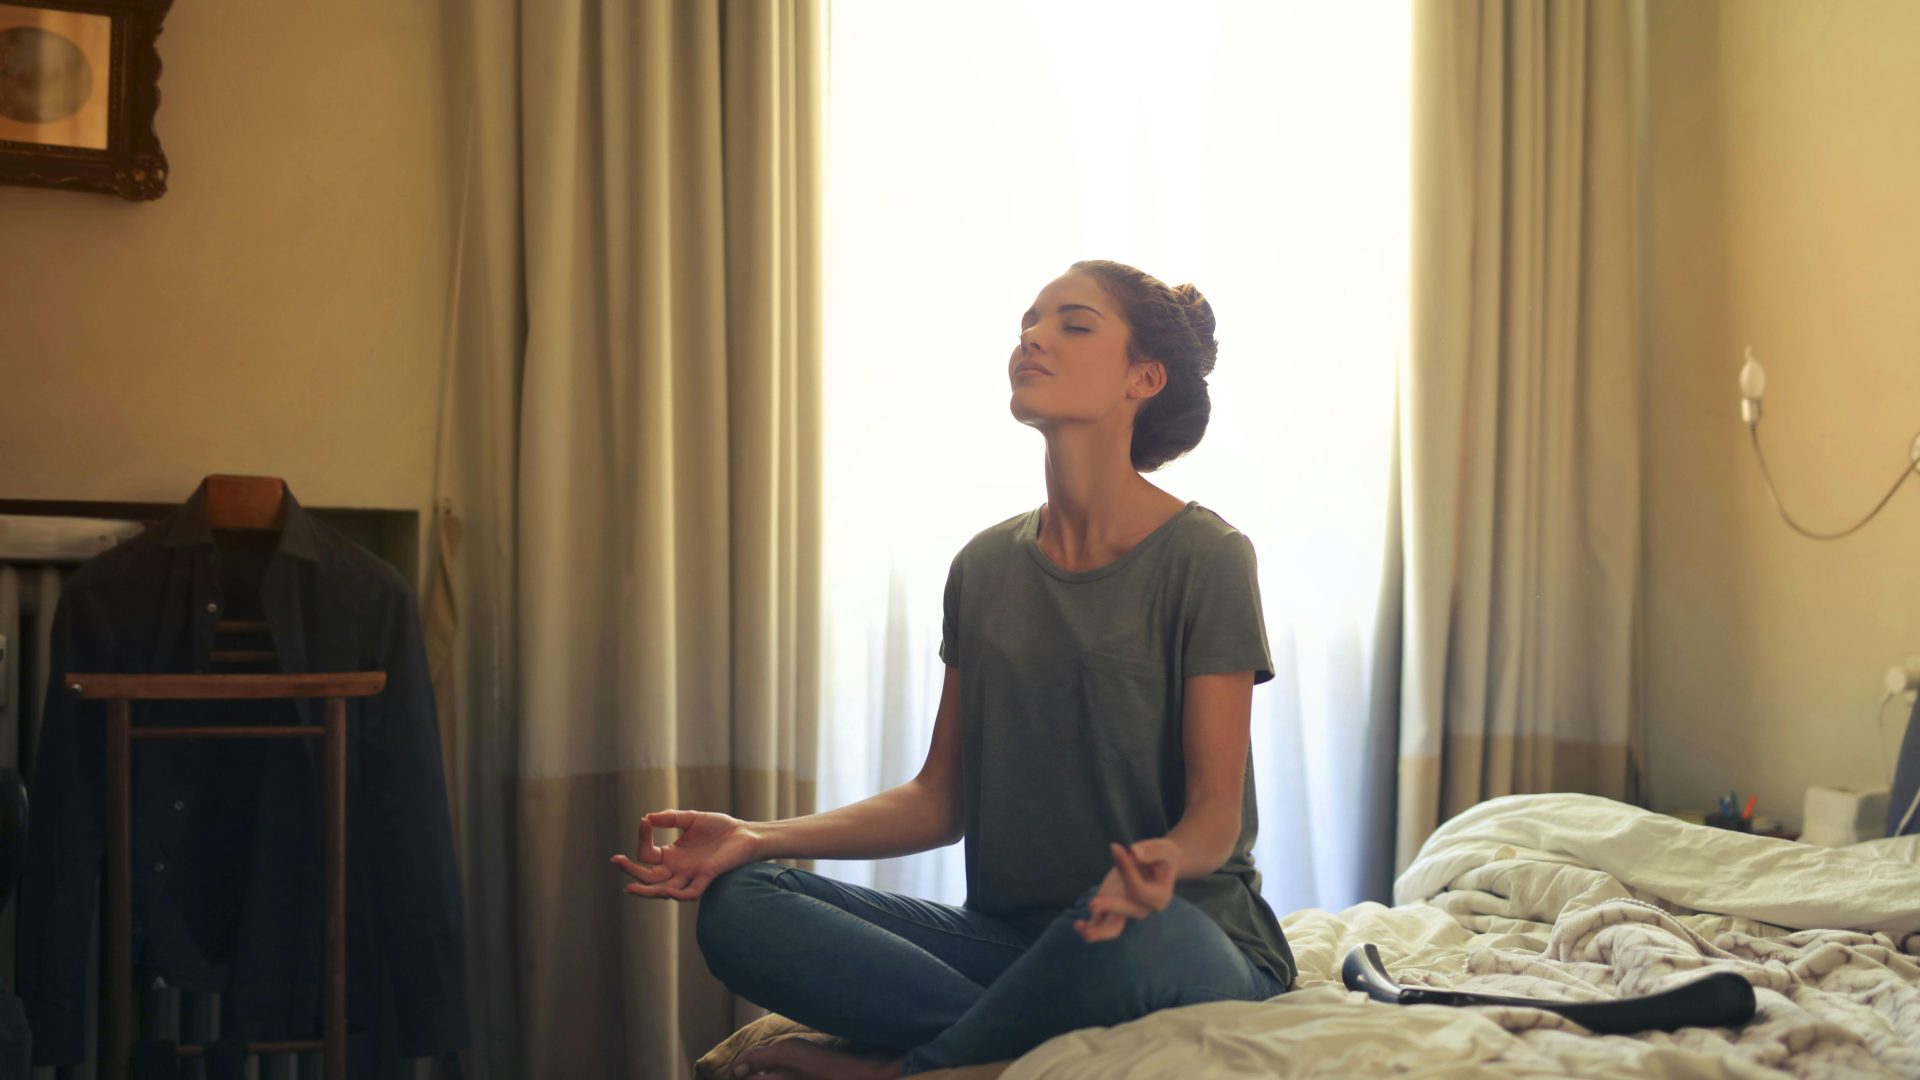 Photo of a person sitting on a bed and meditating